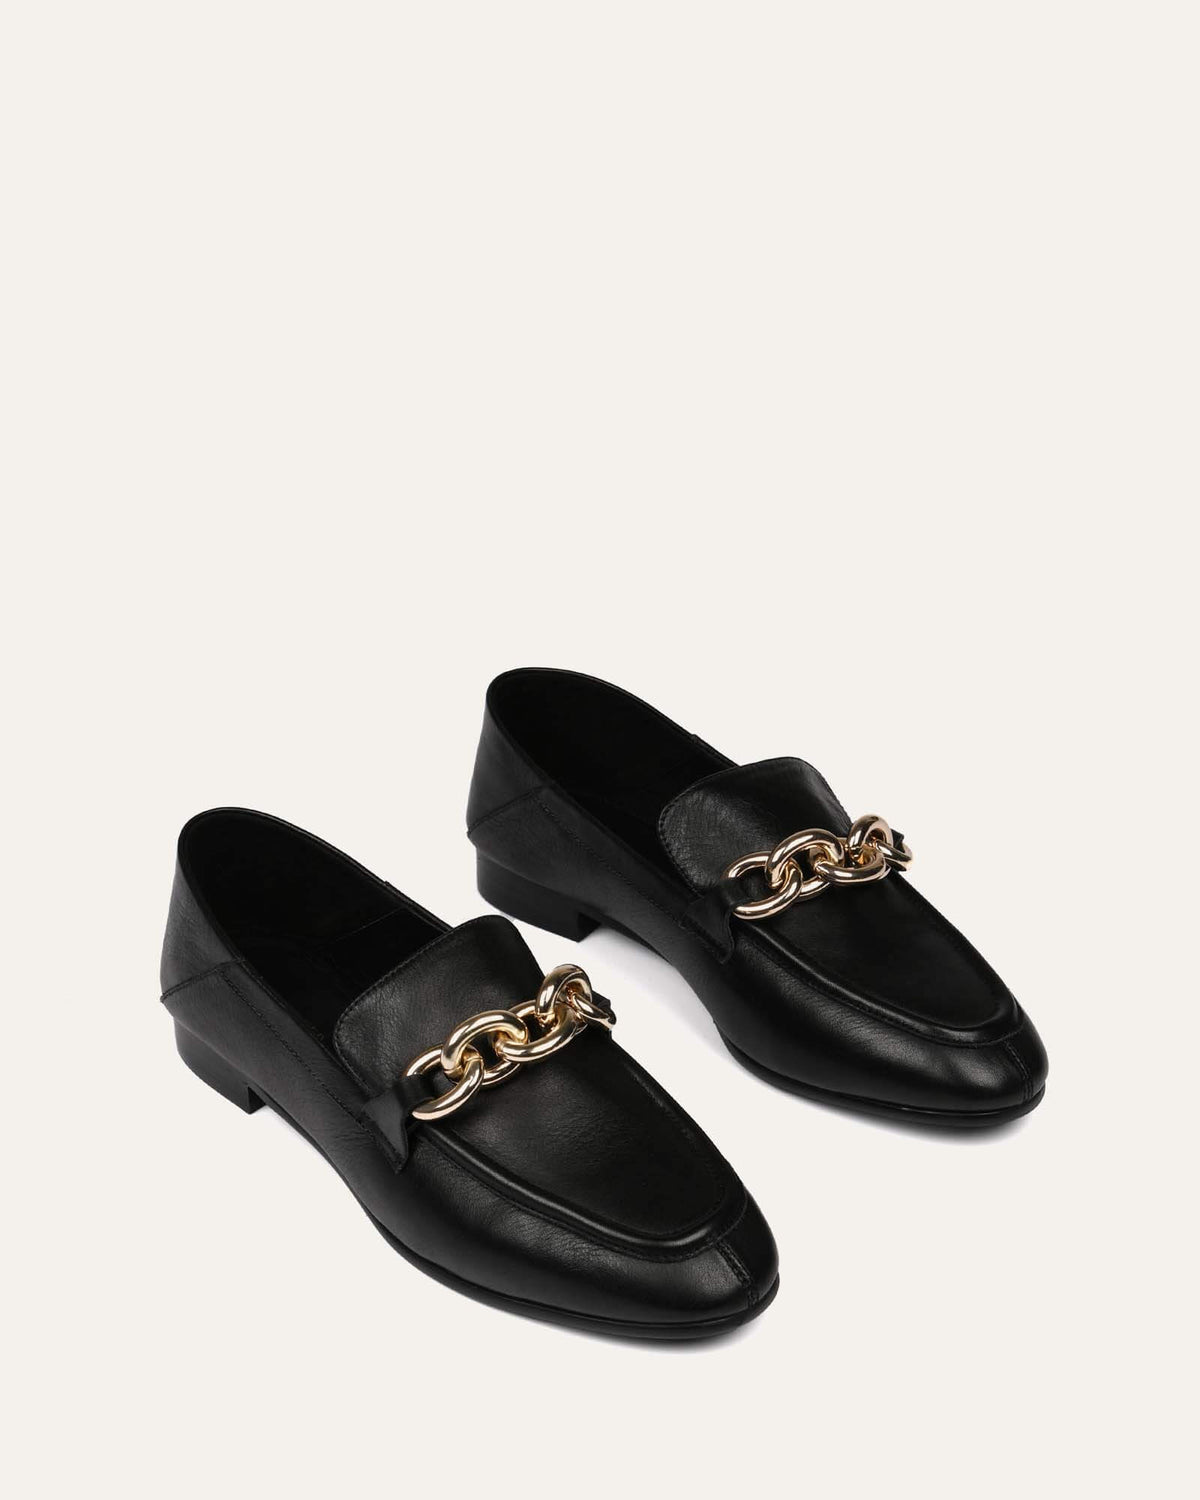 DREAM CASUAL FLATS BLACK LEATHER